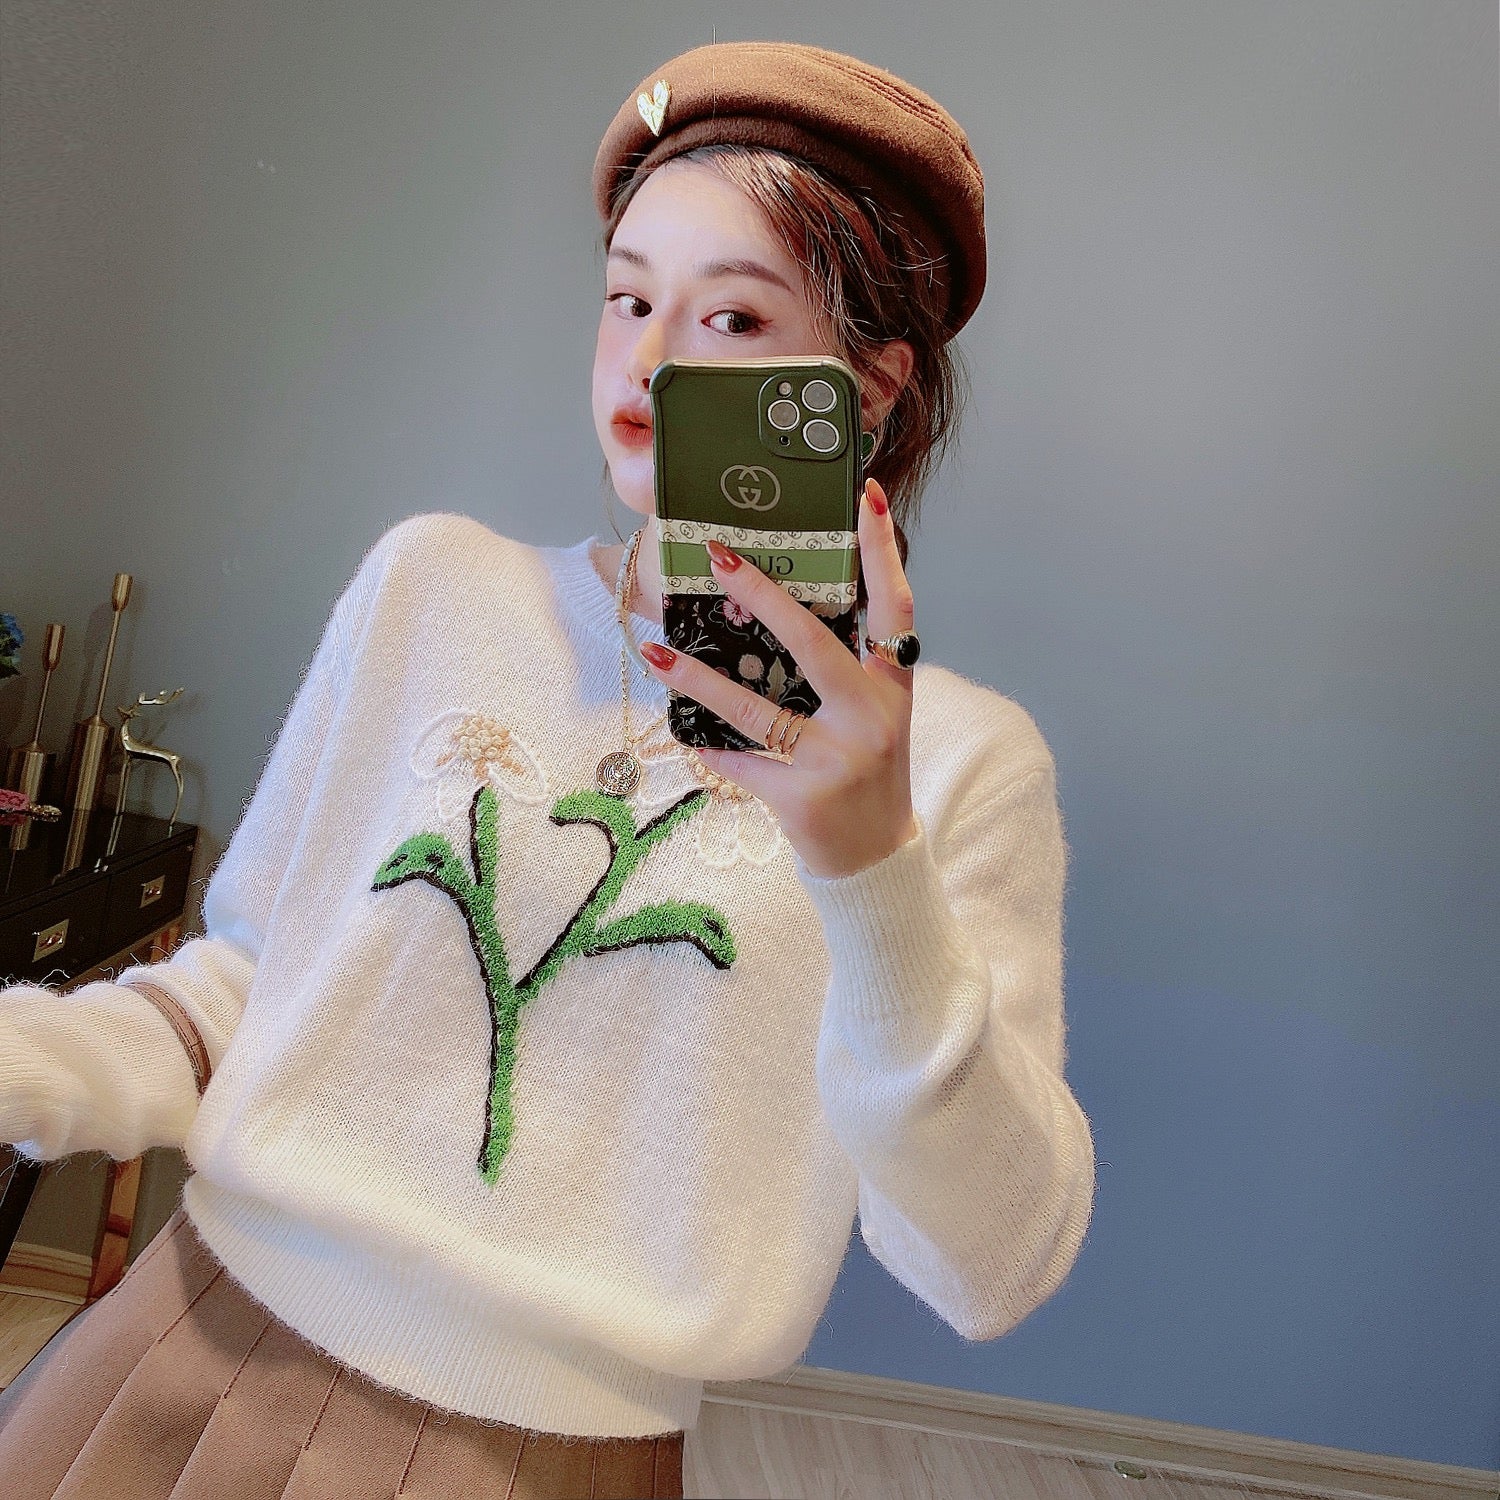 Retro stitching letter embroidery pullover sweater for women autumn an –  Lee Nhi Boutique